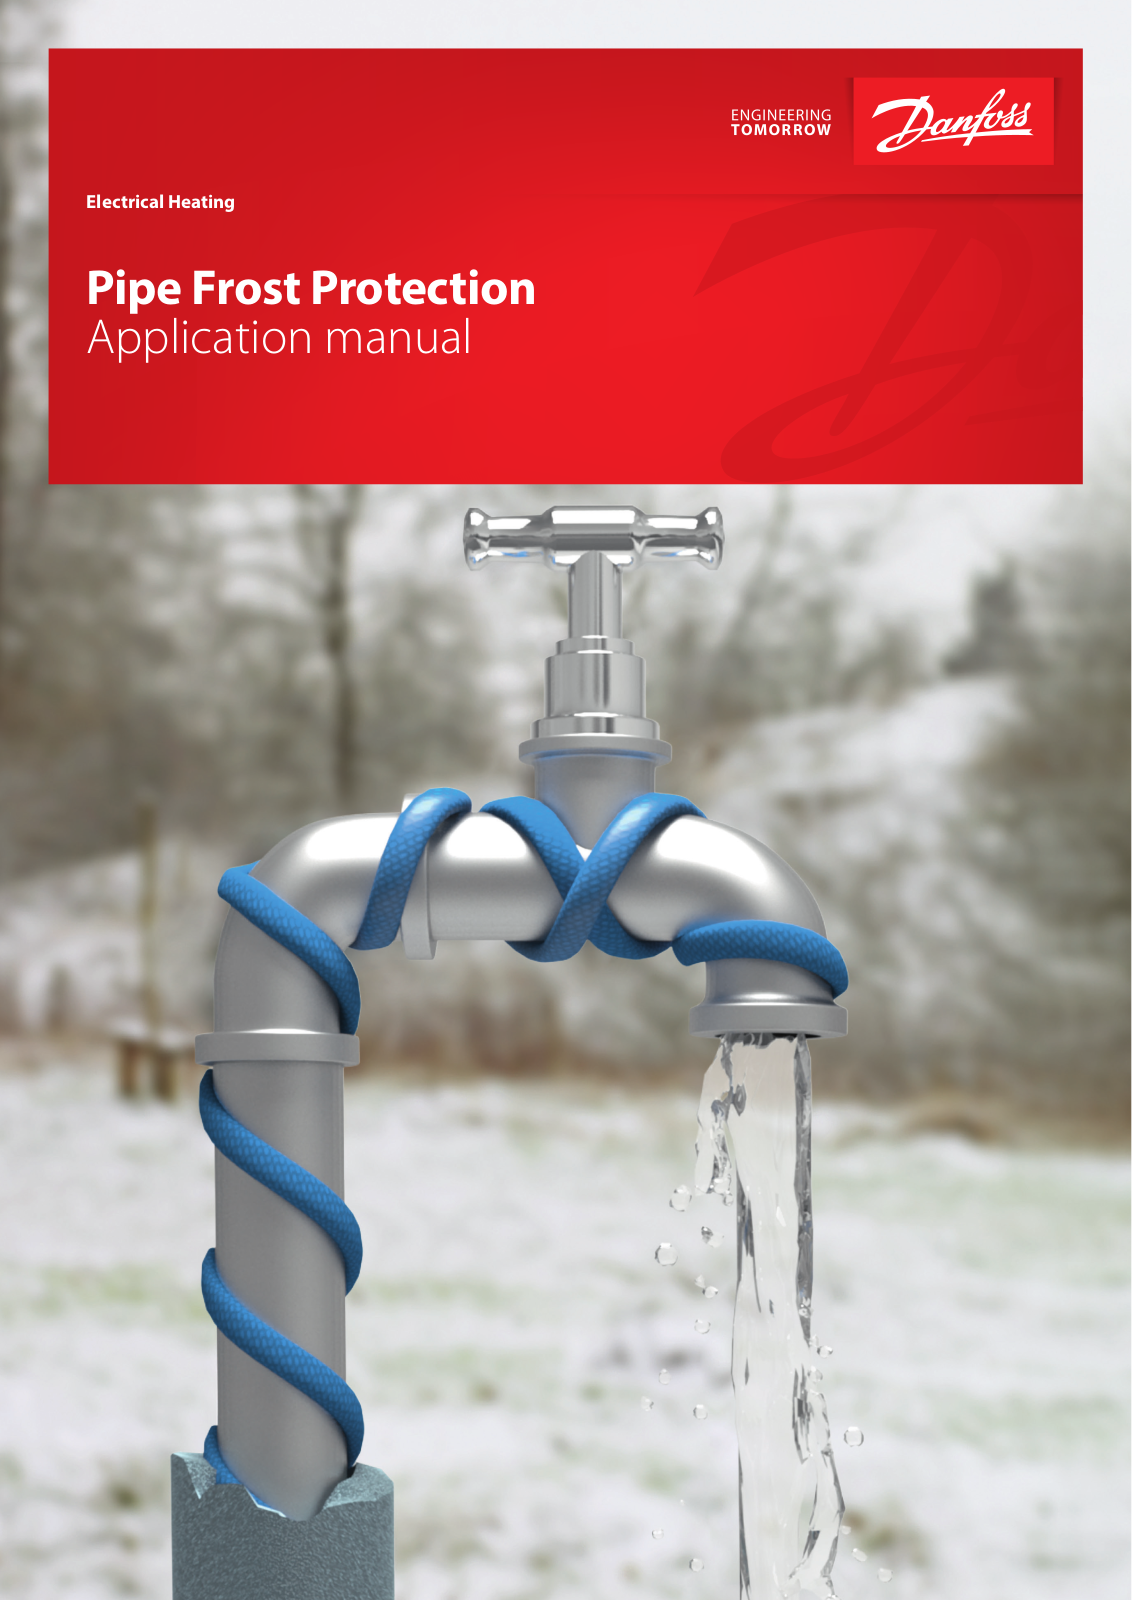 Danfoss Pipe Frost Protection Application guide